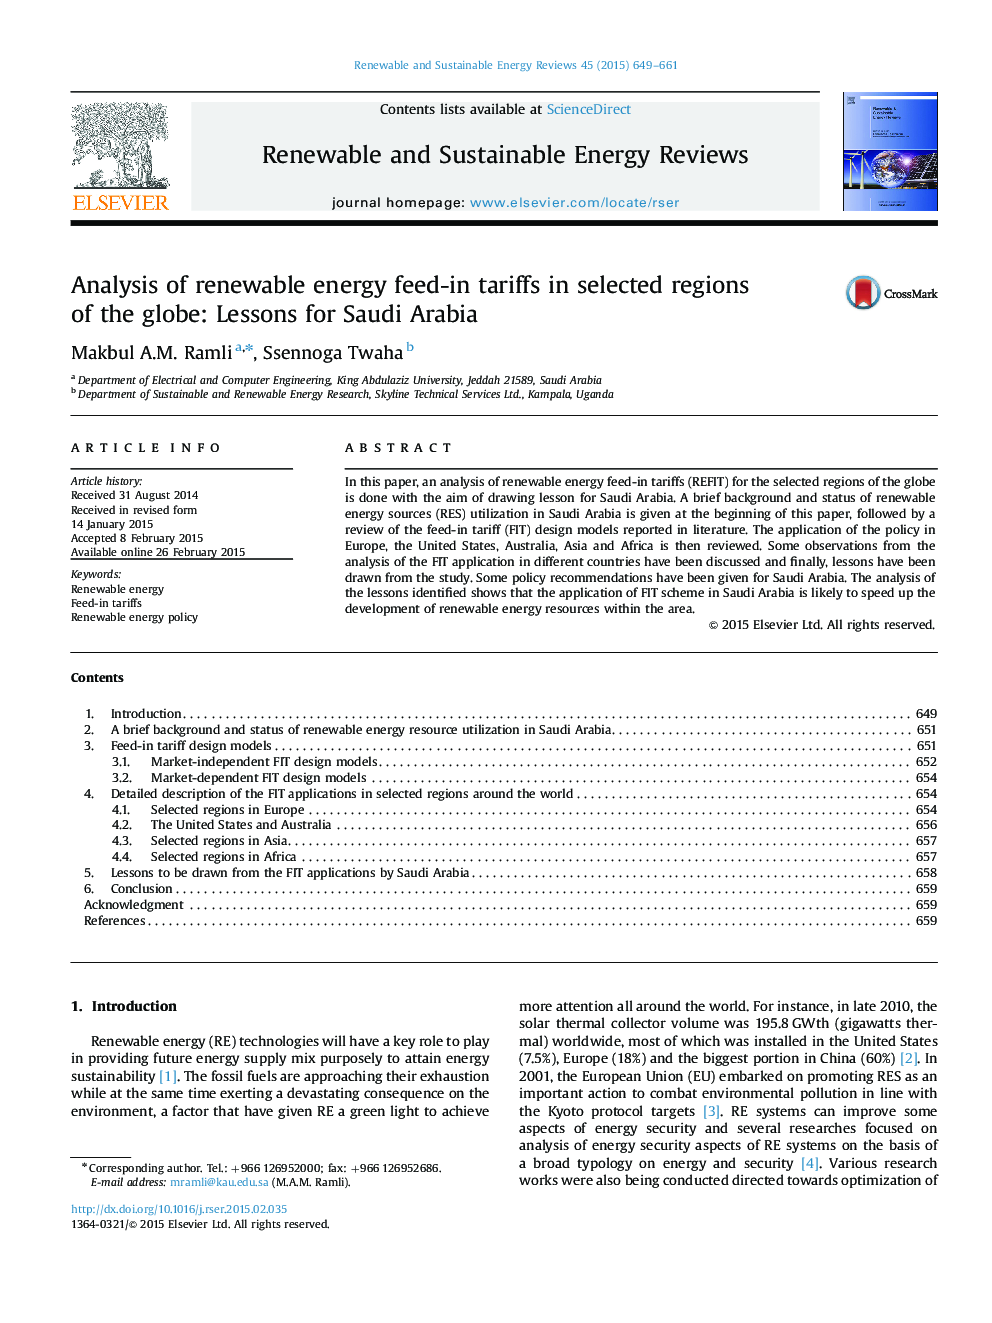 Analysis of renewable energy feed-in tariffs in selected regions of the globe: Lessons for Saudi Arabia